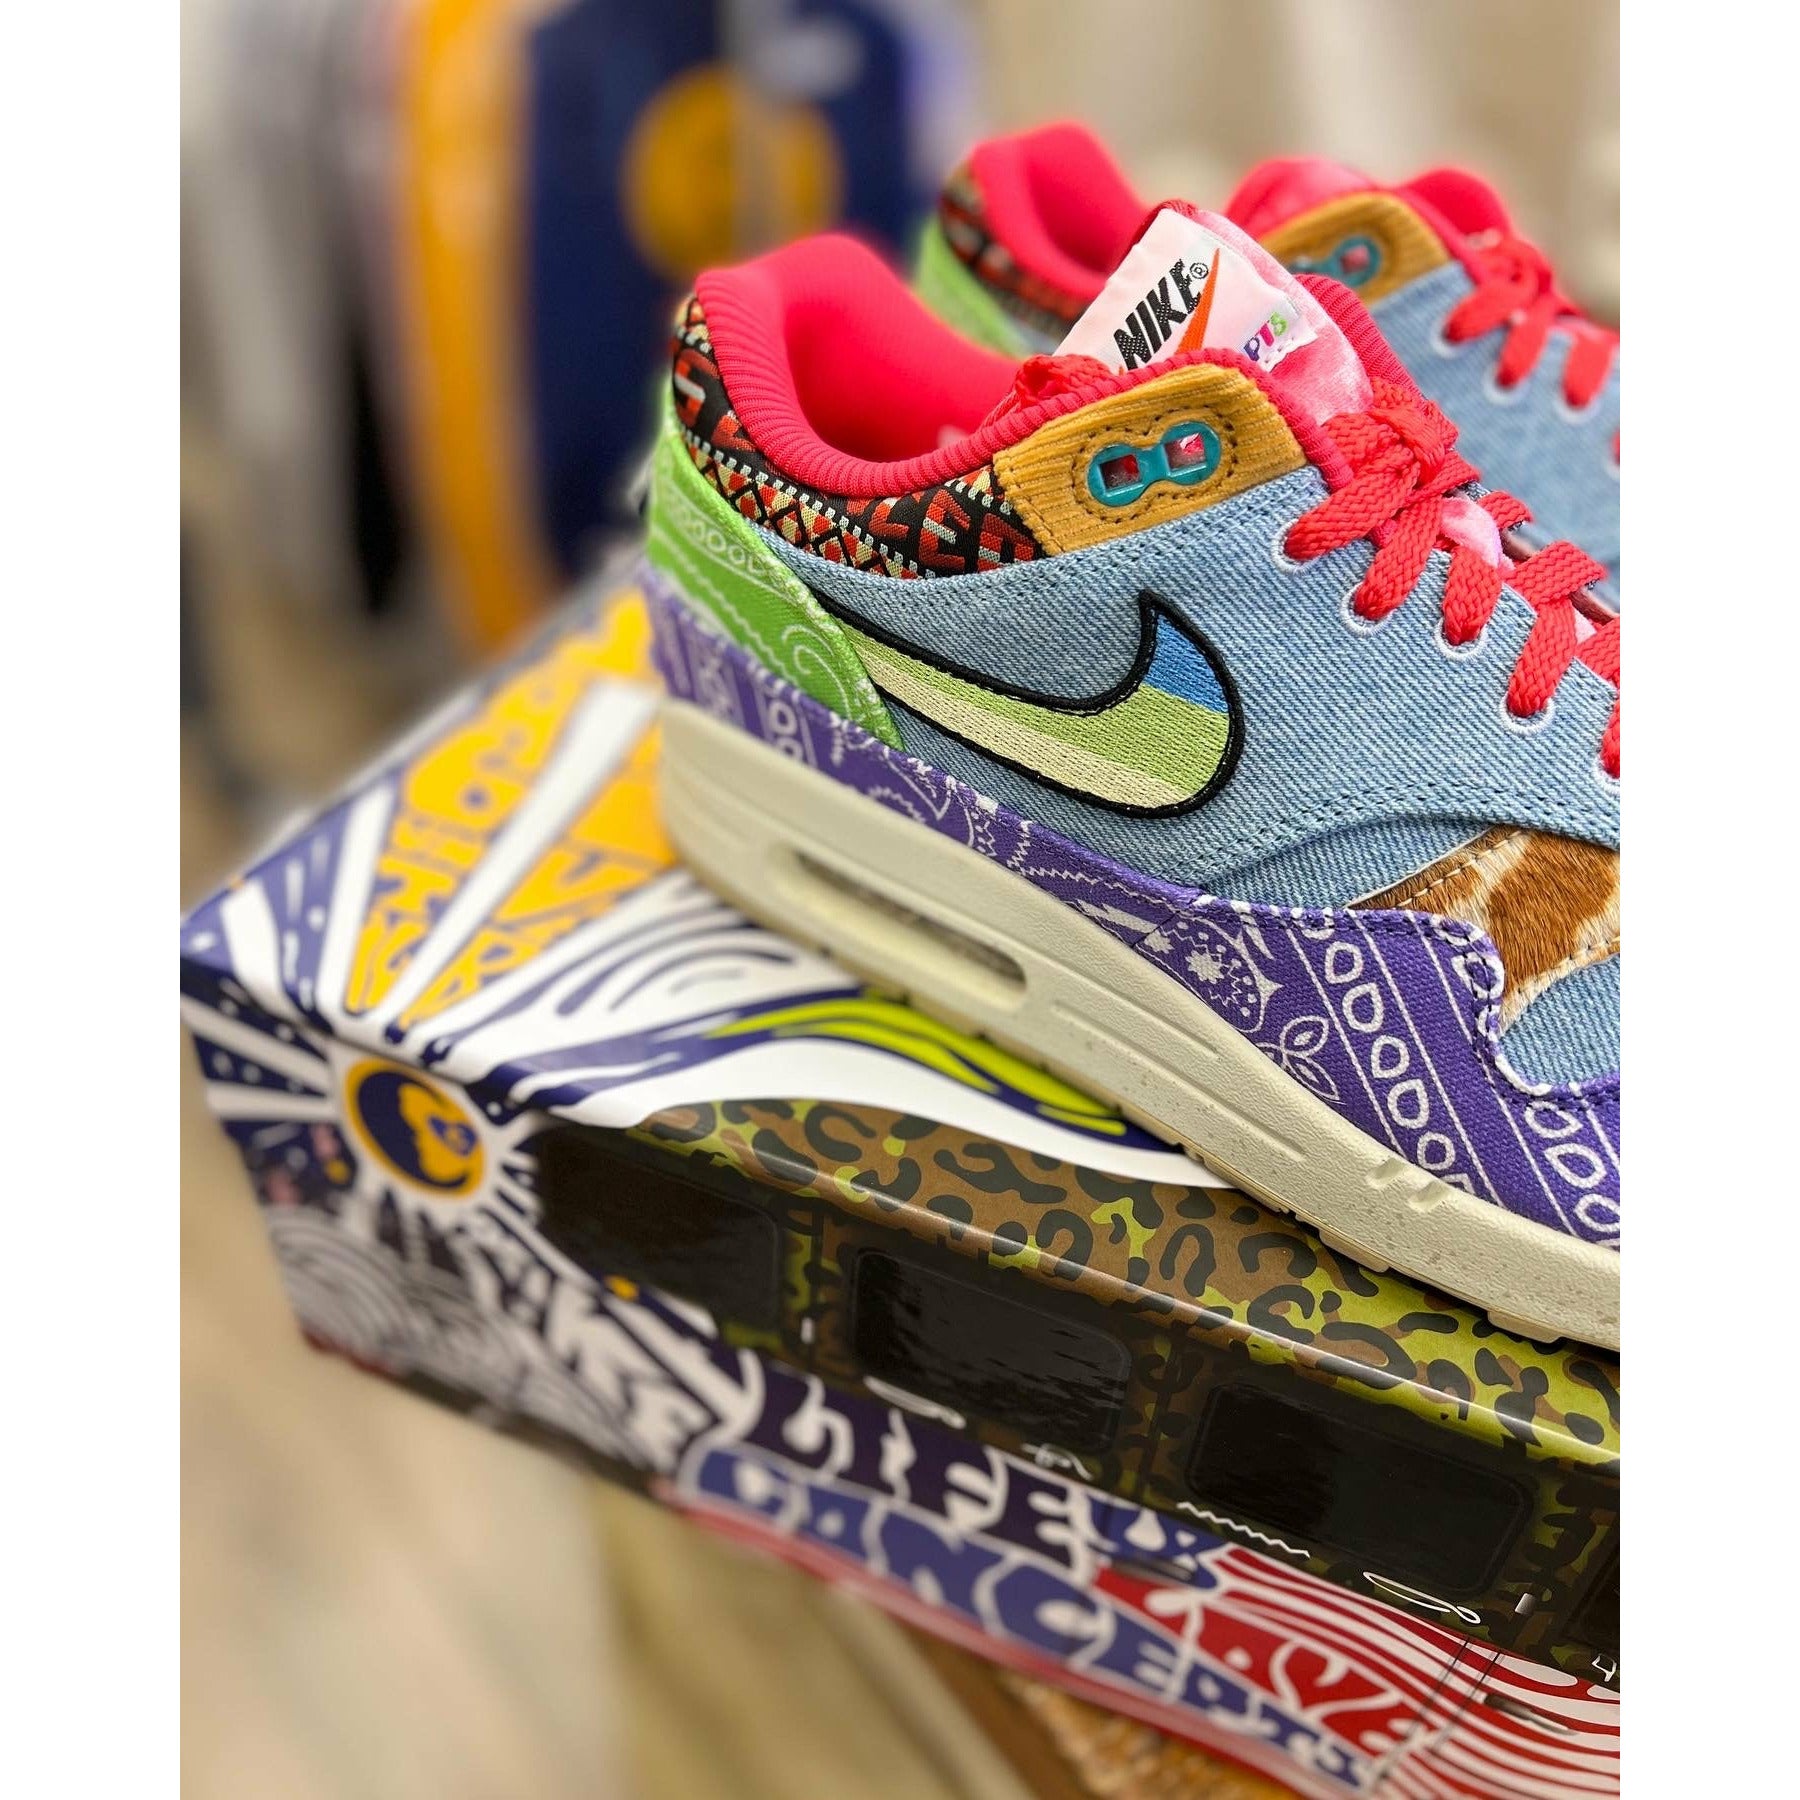 Nike Air Max 1 SP Concepts Far Out (Special Box) from Nike